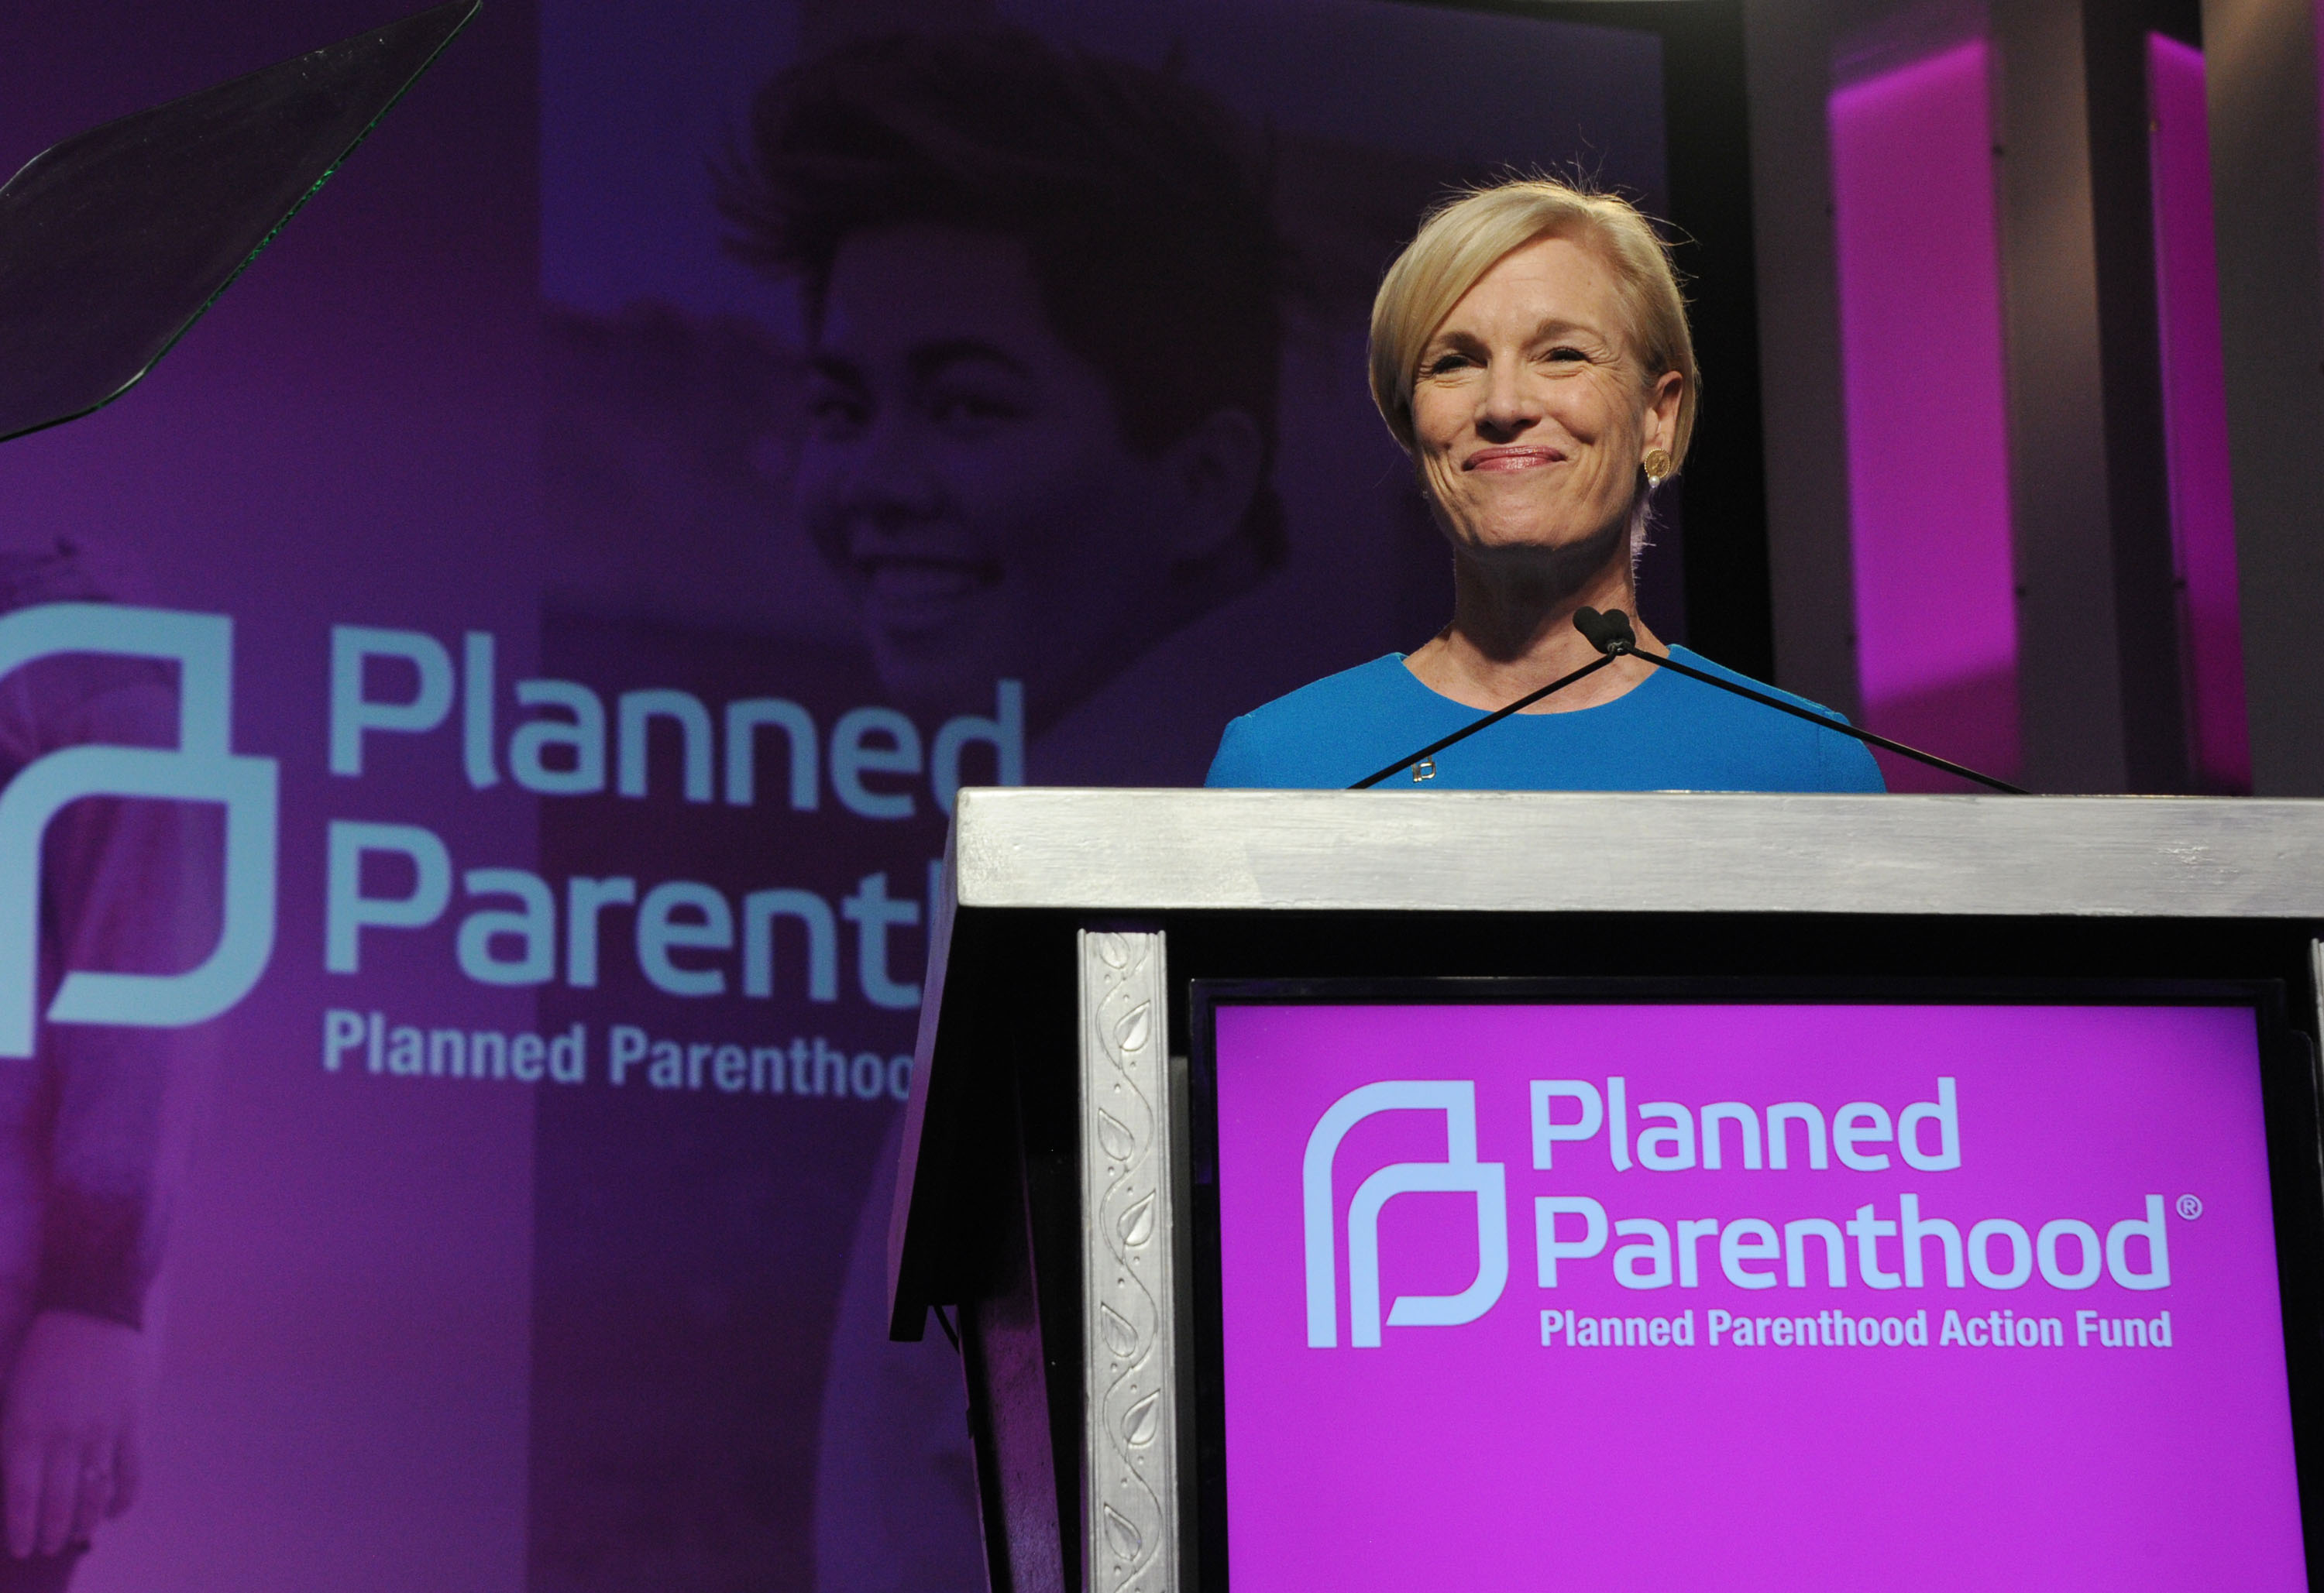 President and CEO Planned Parenthood Cecile Richards onstage at the 2016 Planned Parenthood Action Fund Membership Event held during the Planned Parenthood National Convention at Washington Hilton in Washington on June 10, 2016. (Jennifer Graylock&mdash;WireImage/Getty Images)